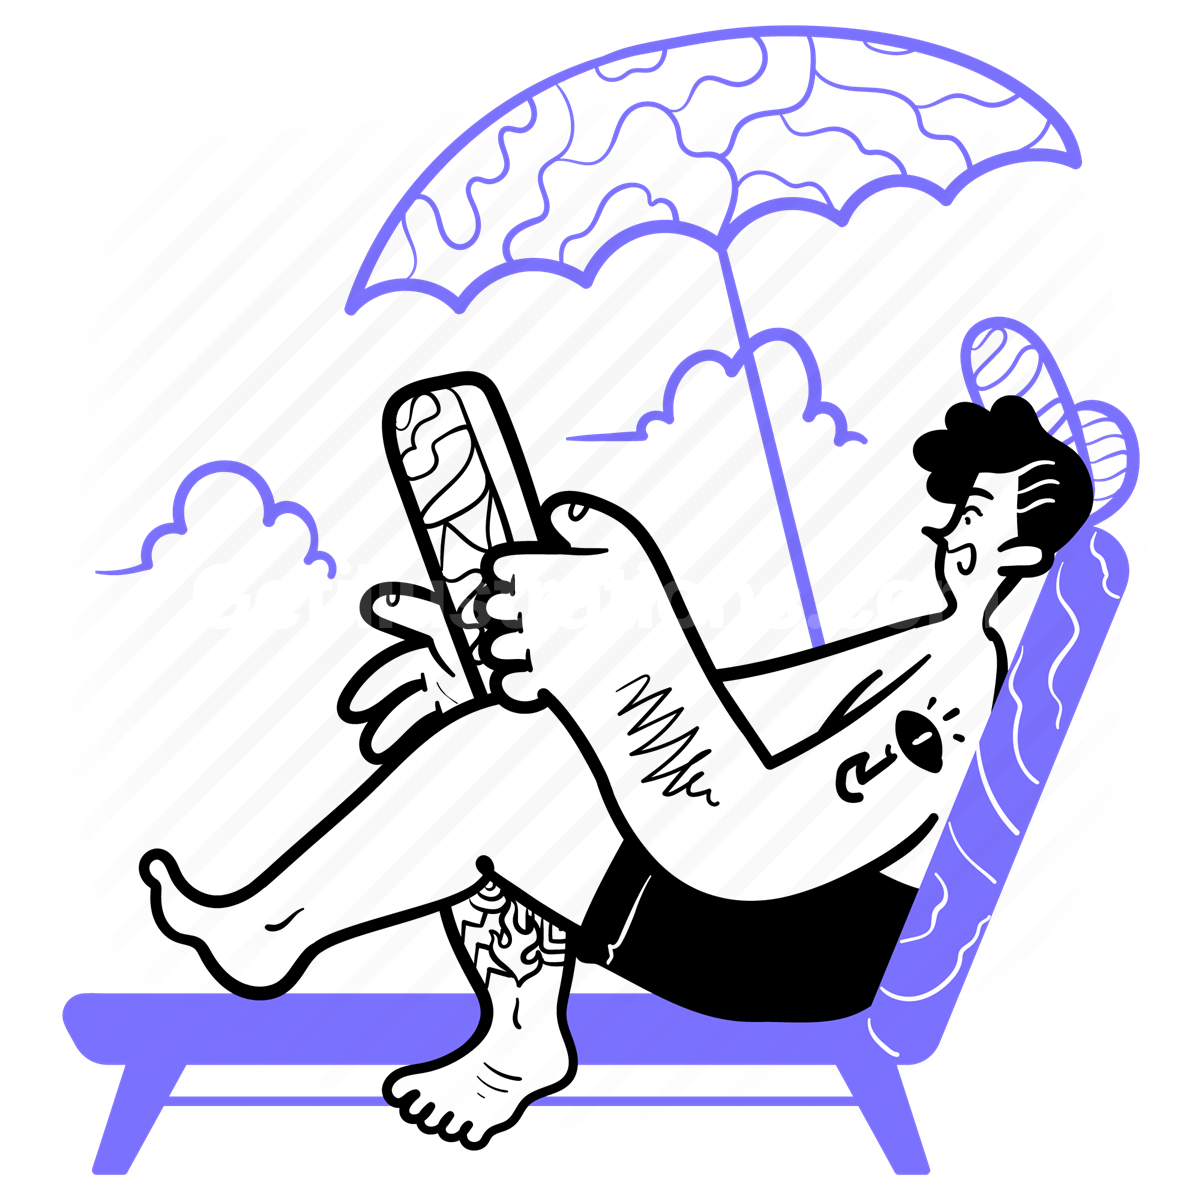 travelling, holiday, vacation, leisure, lounge, parasol, man, relax, chill